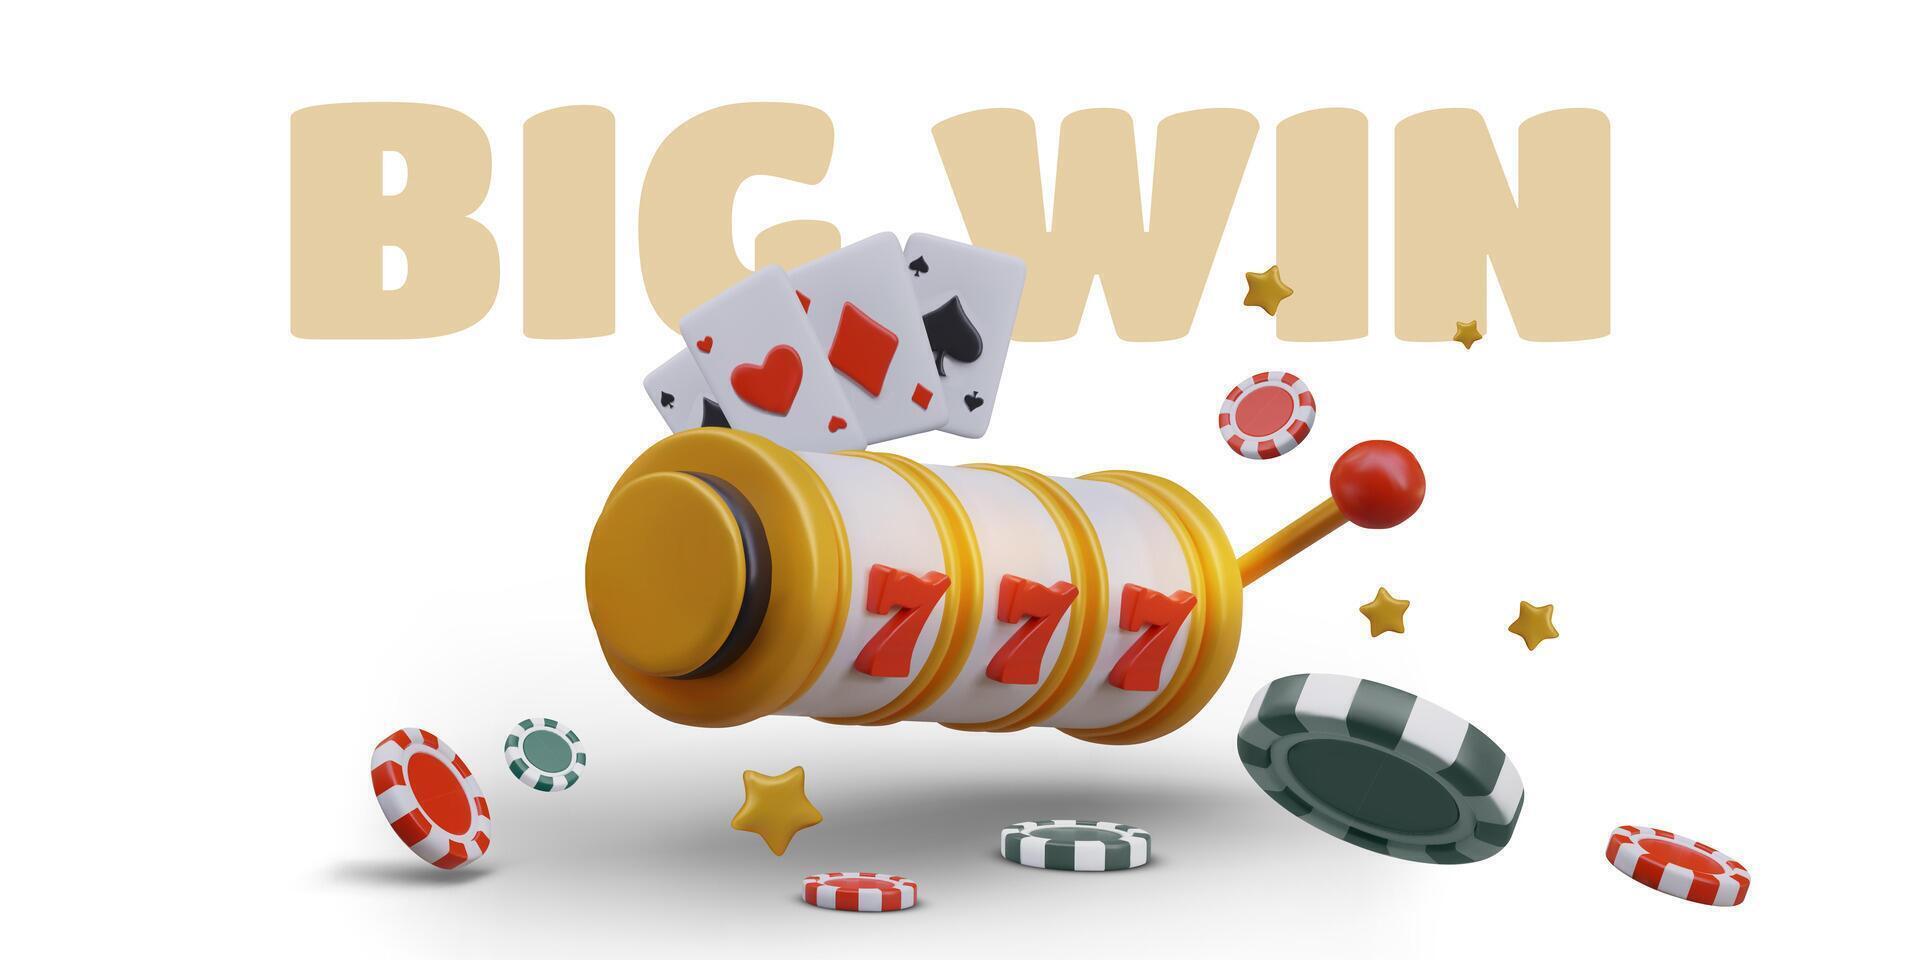 Big win vector banner. 3D slot machine, playing cards, poker chips, stars